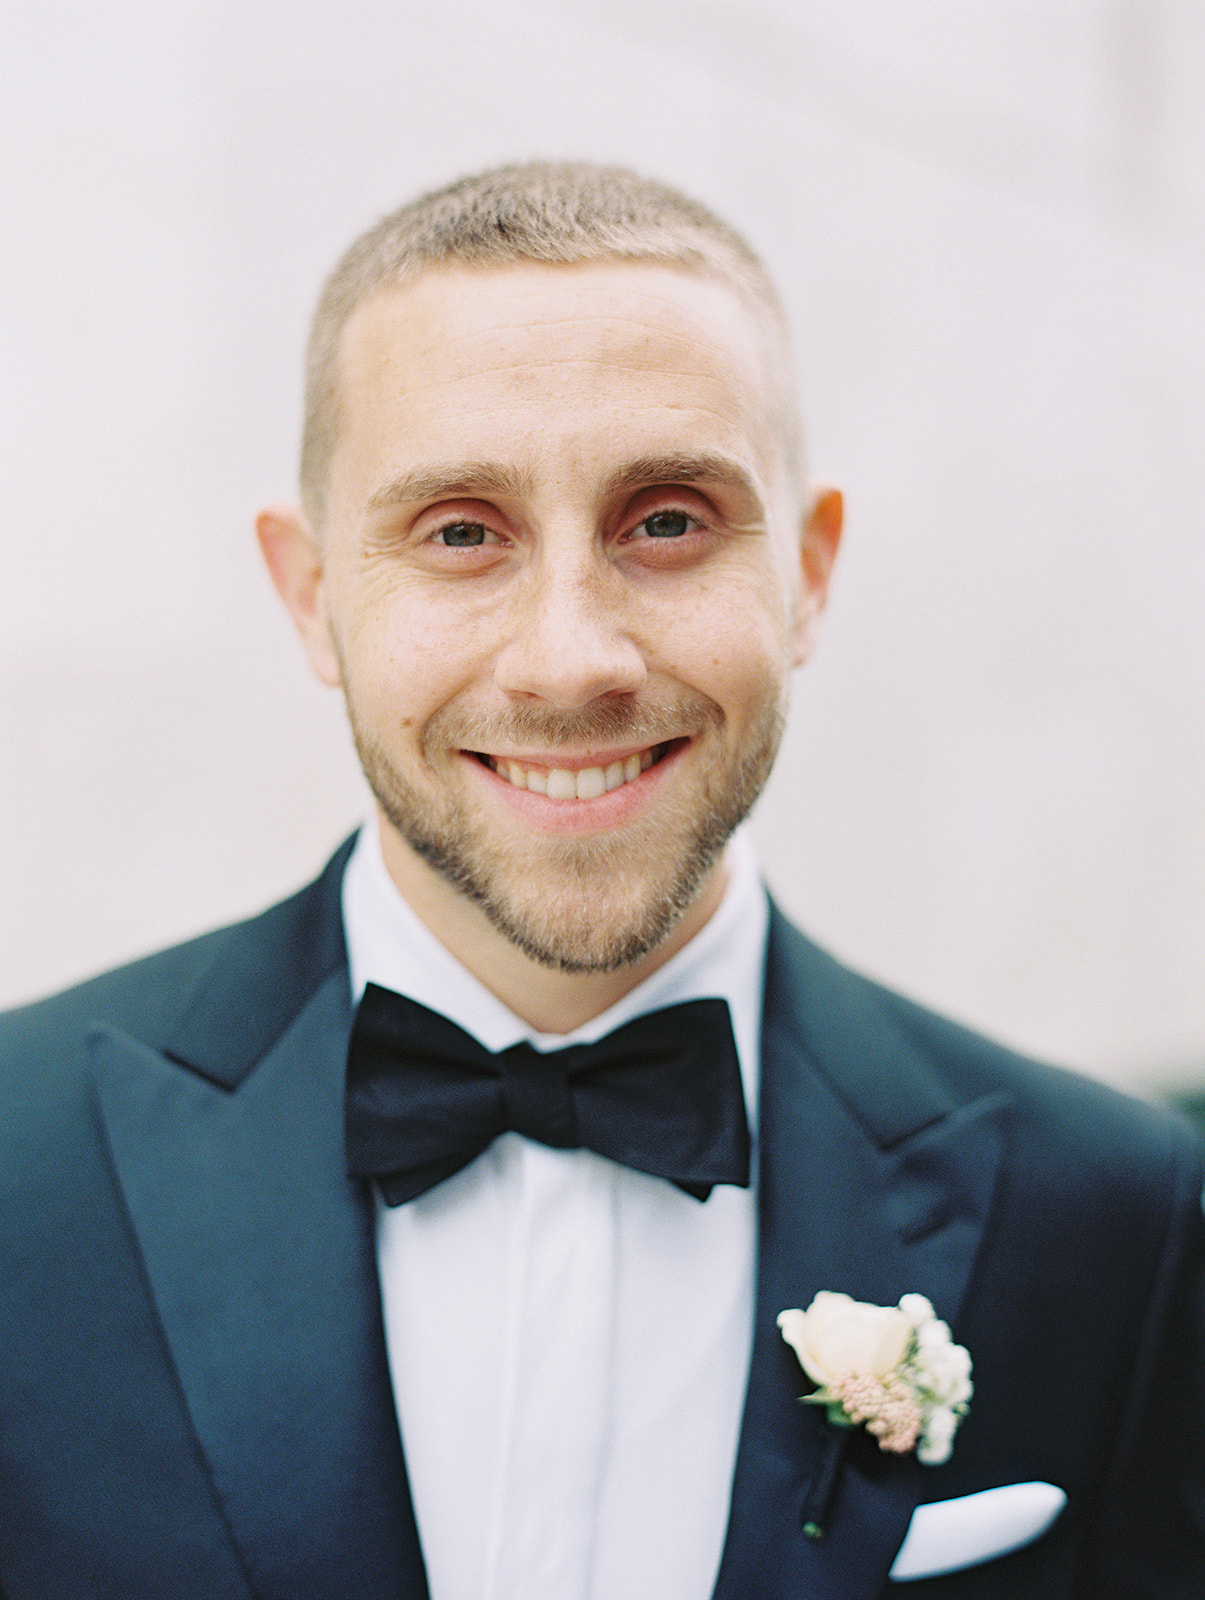 Groom smiling at the camera with black bow tie